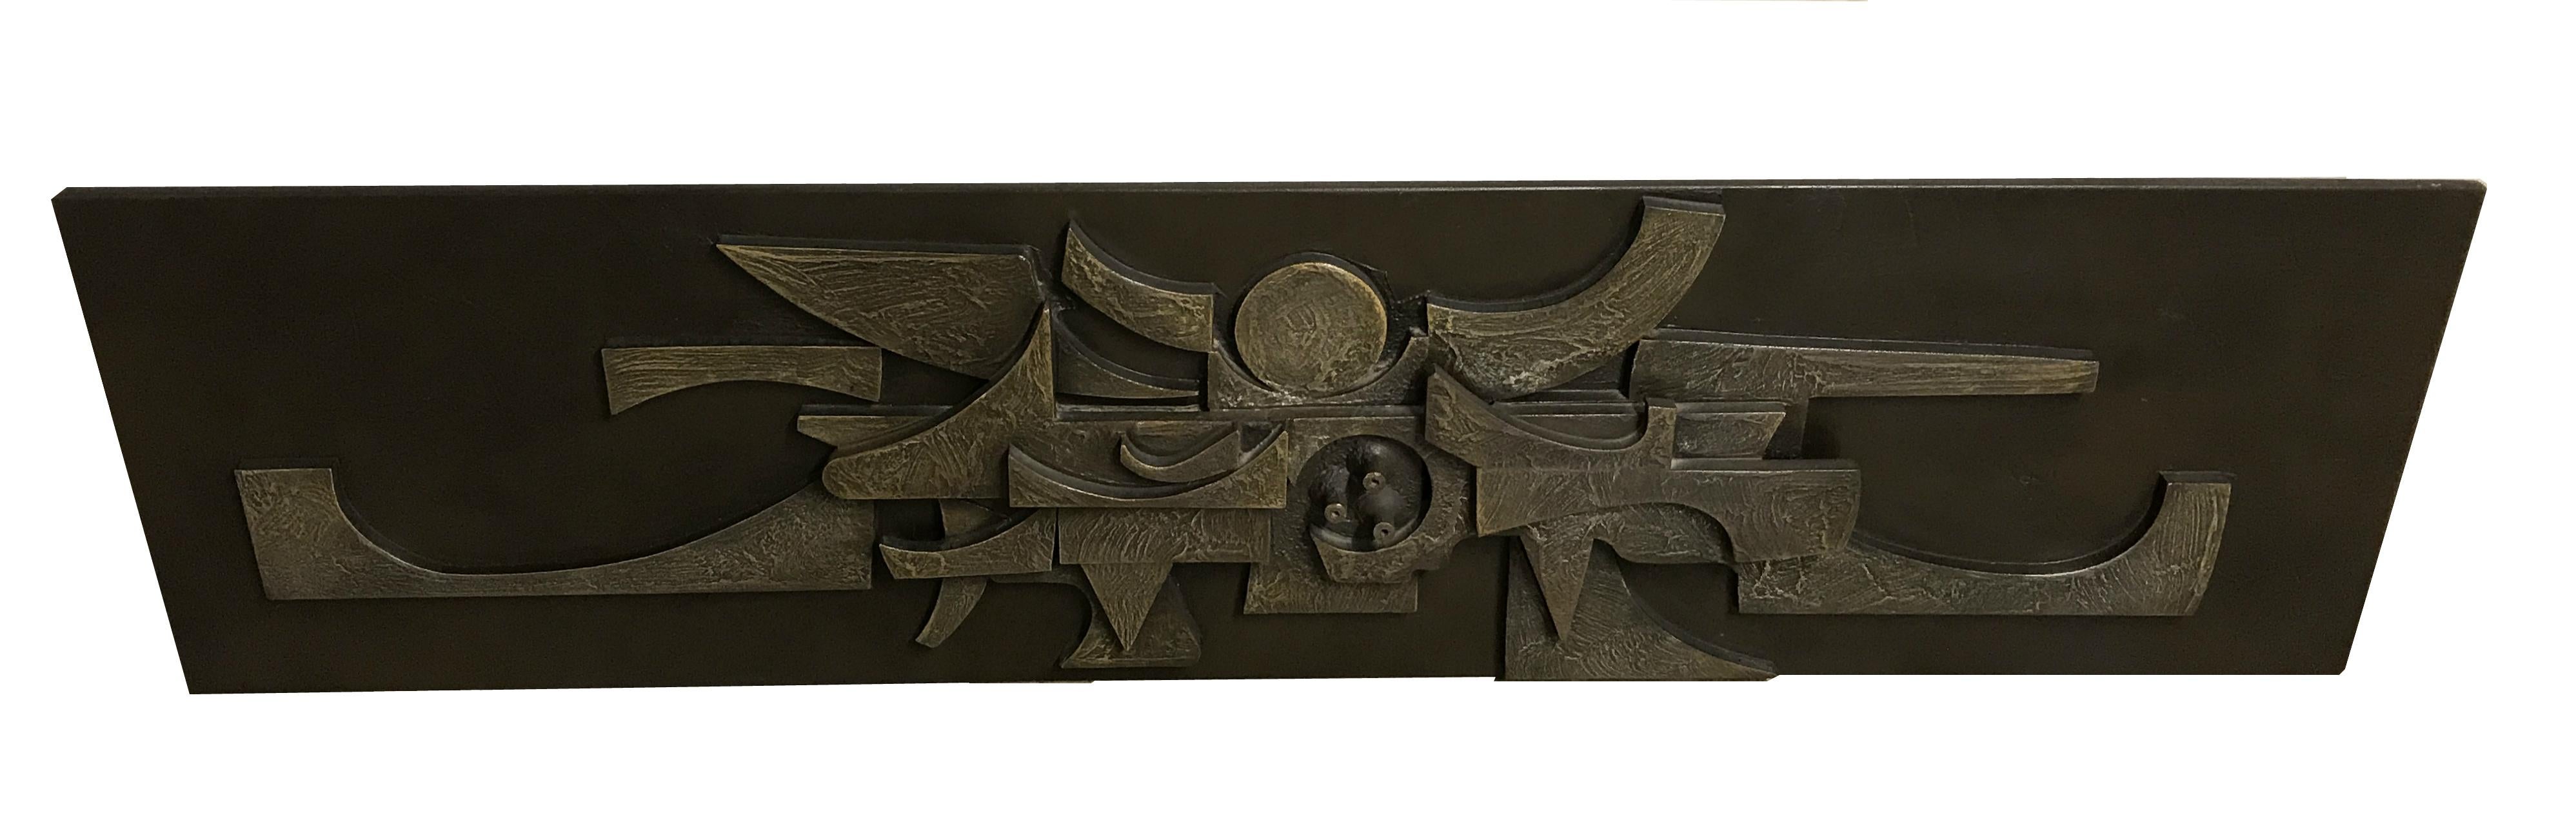 Architectural brutalist wall mounted sculpture made from wood.

This typical seventies brutalist design sculpture came from a mid century home and was manufactured by a local belgian artist.

Rare due to it's large size.

Good condition apart from